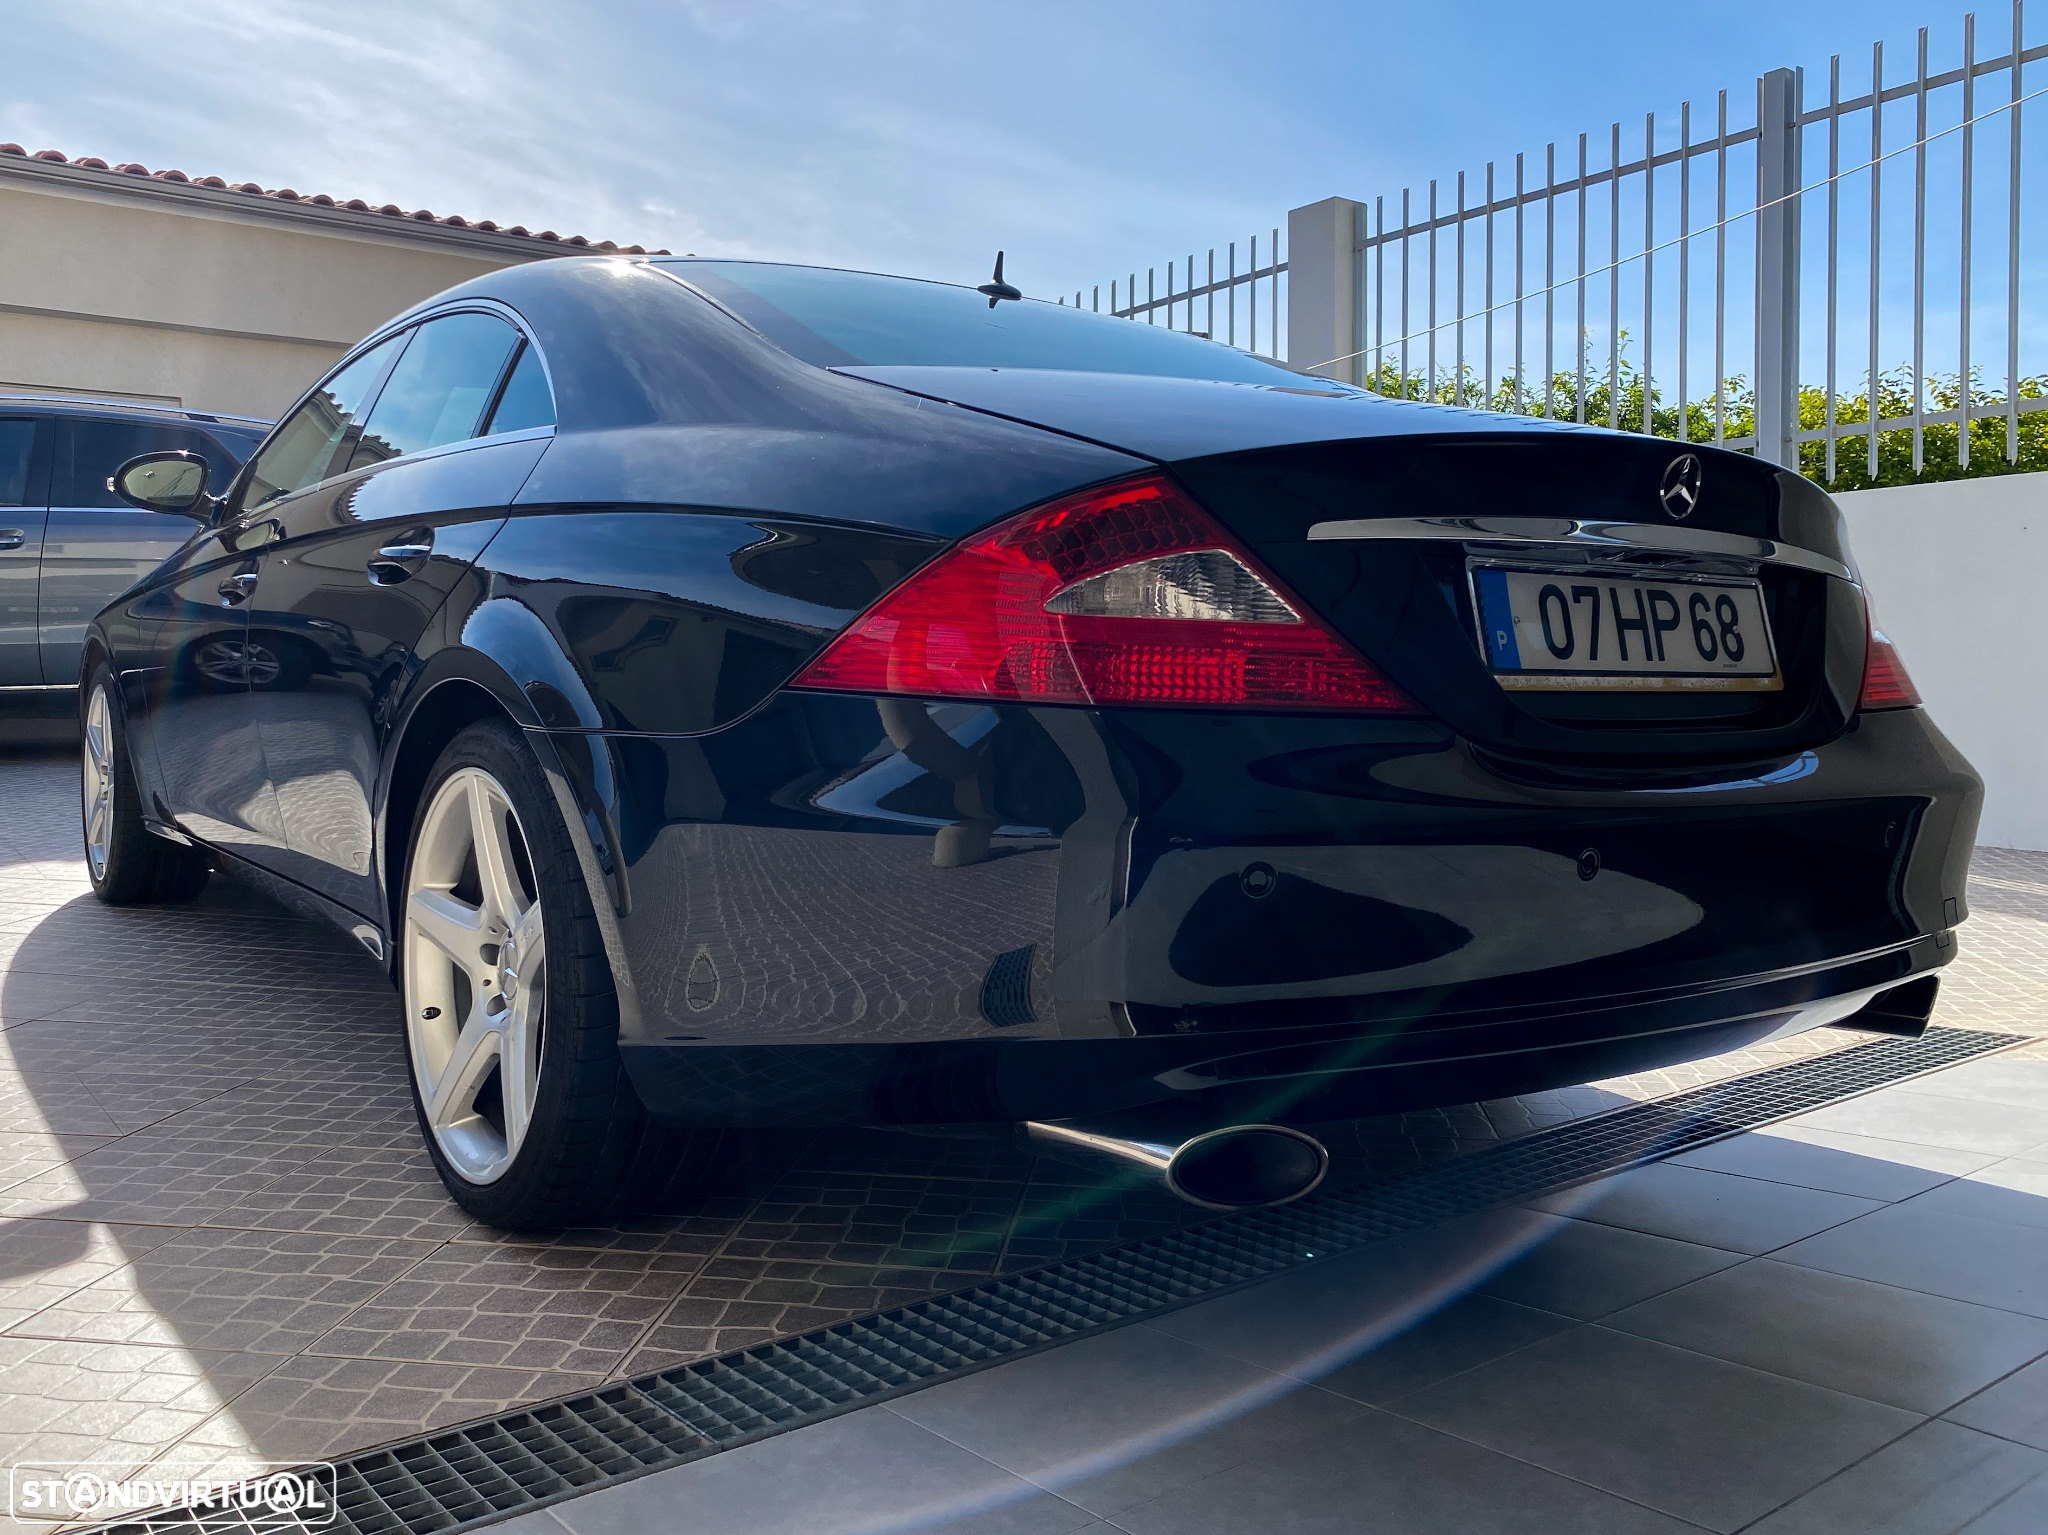 Mercedes-Benz CLS 320 CDI 7G-TRONIC Grand Edition - 3